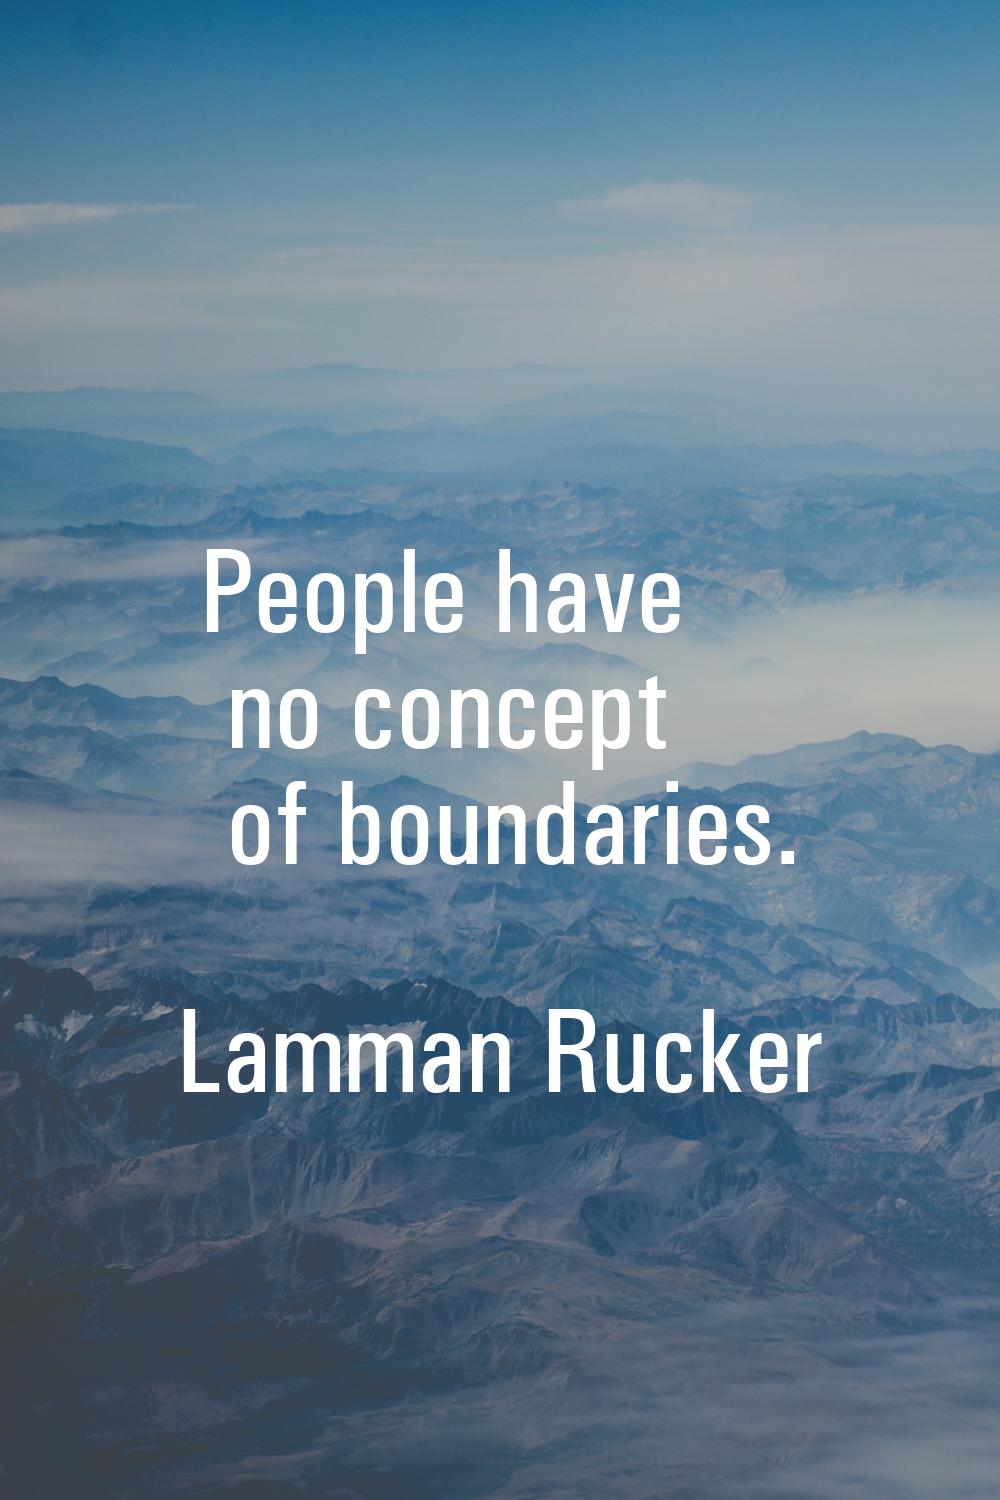 People have no concept of boundaries.